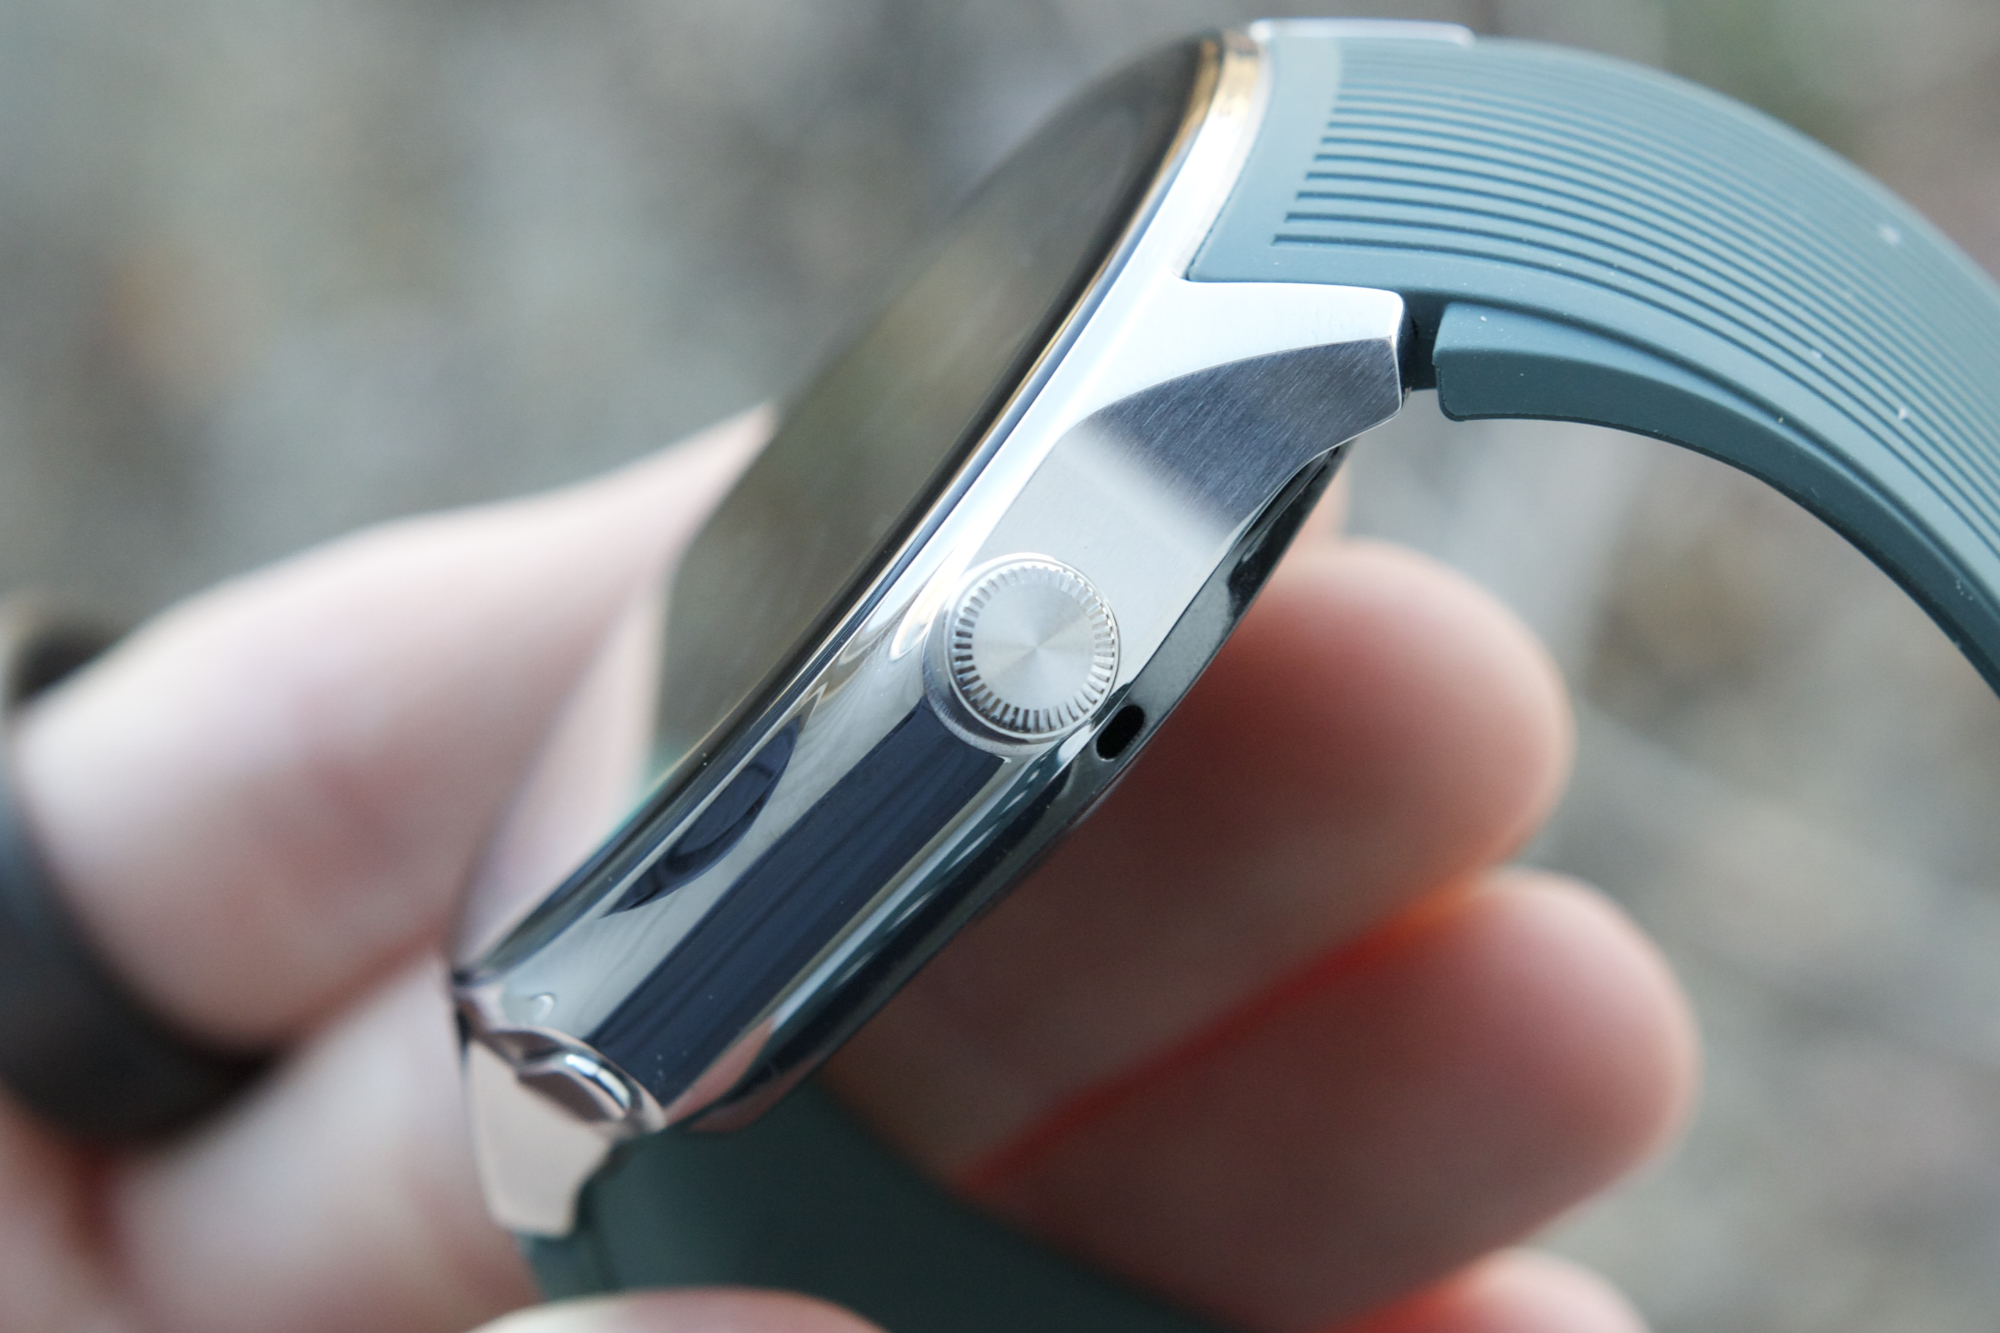 A close-up of the crown on the OnePlus Watch 2.